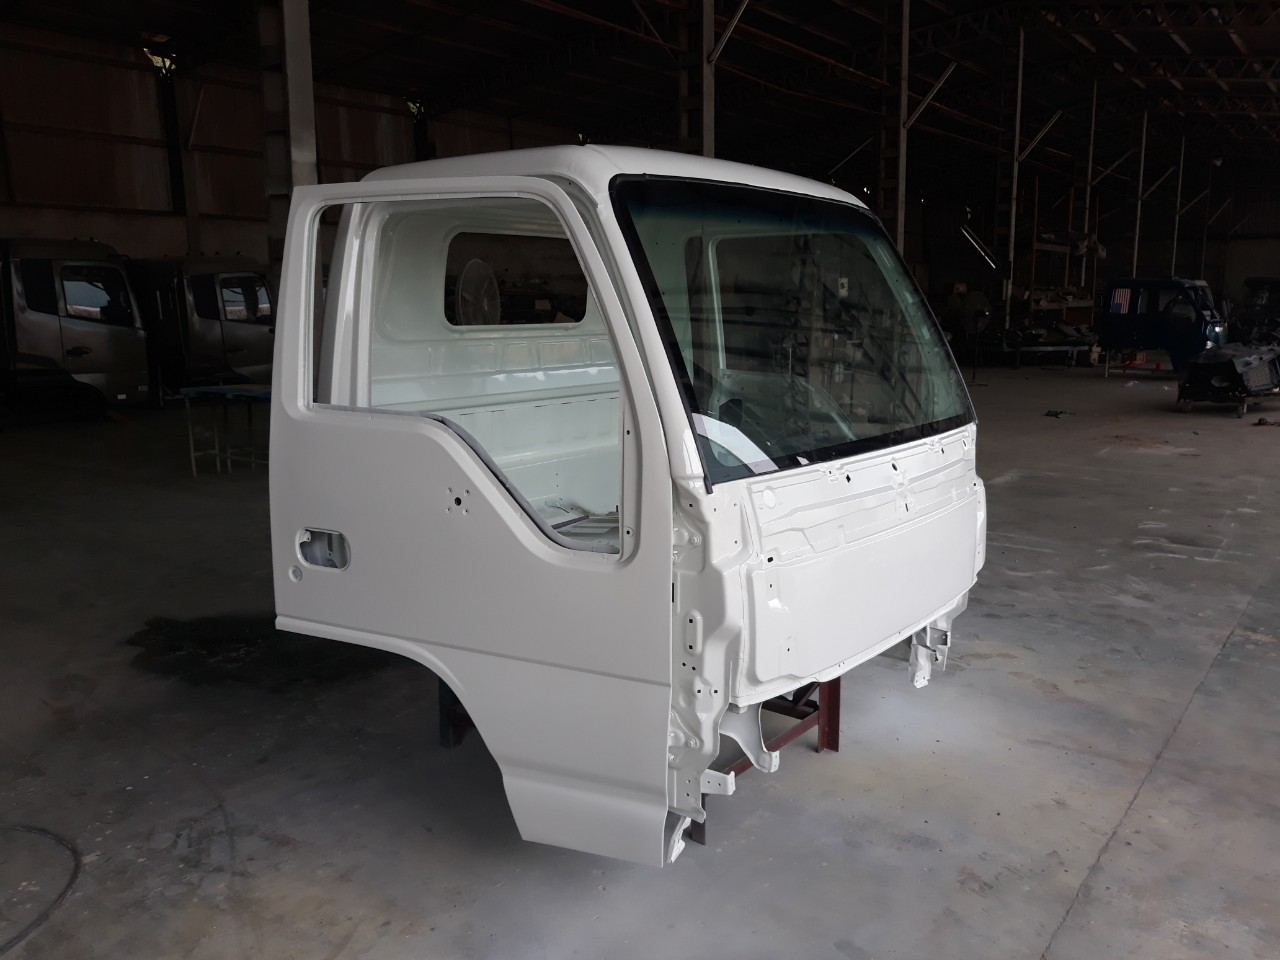 CABIN ISUZU QKR 1 TAN 9 210PS CHAT LUONG CAO